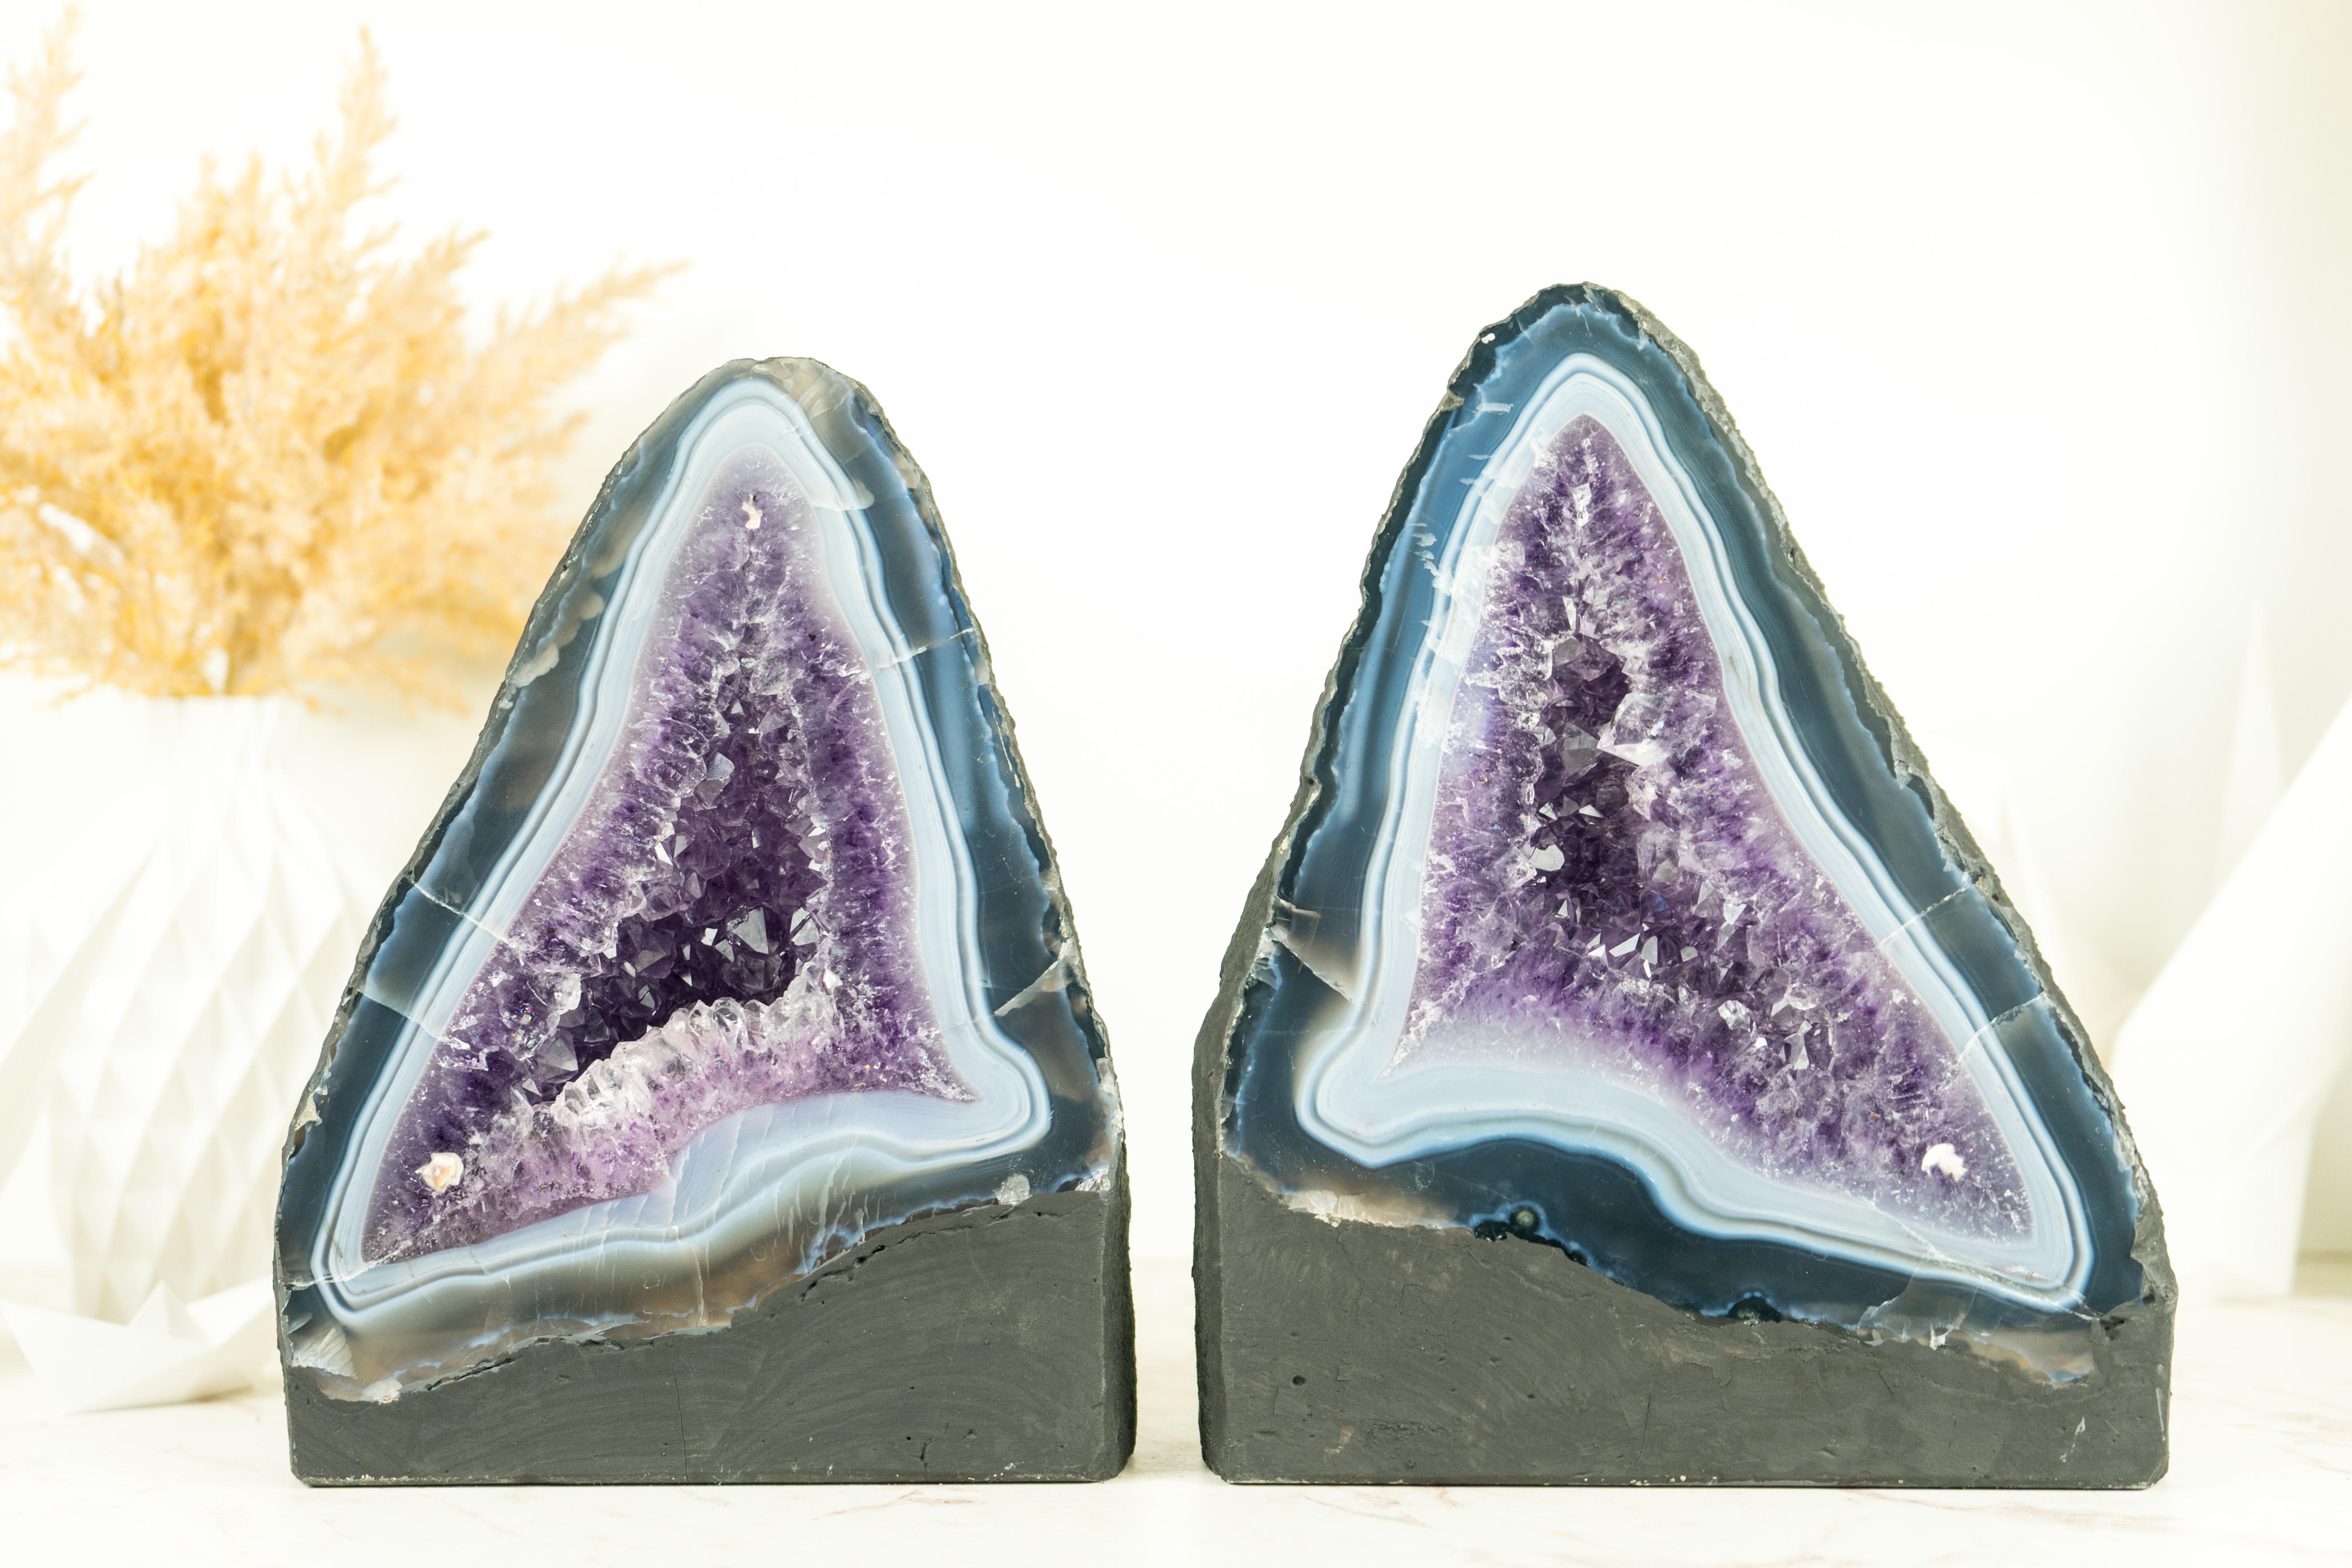 Pair of Book-Matching Blue Lace Agate Geodes with Crystal Amethyst For Sale 2